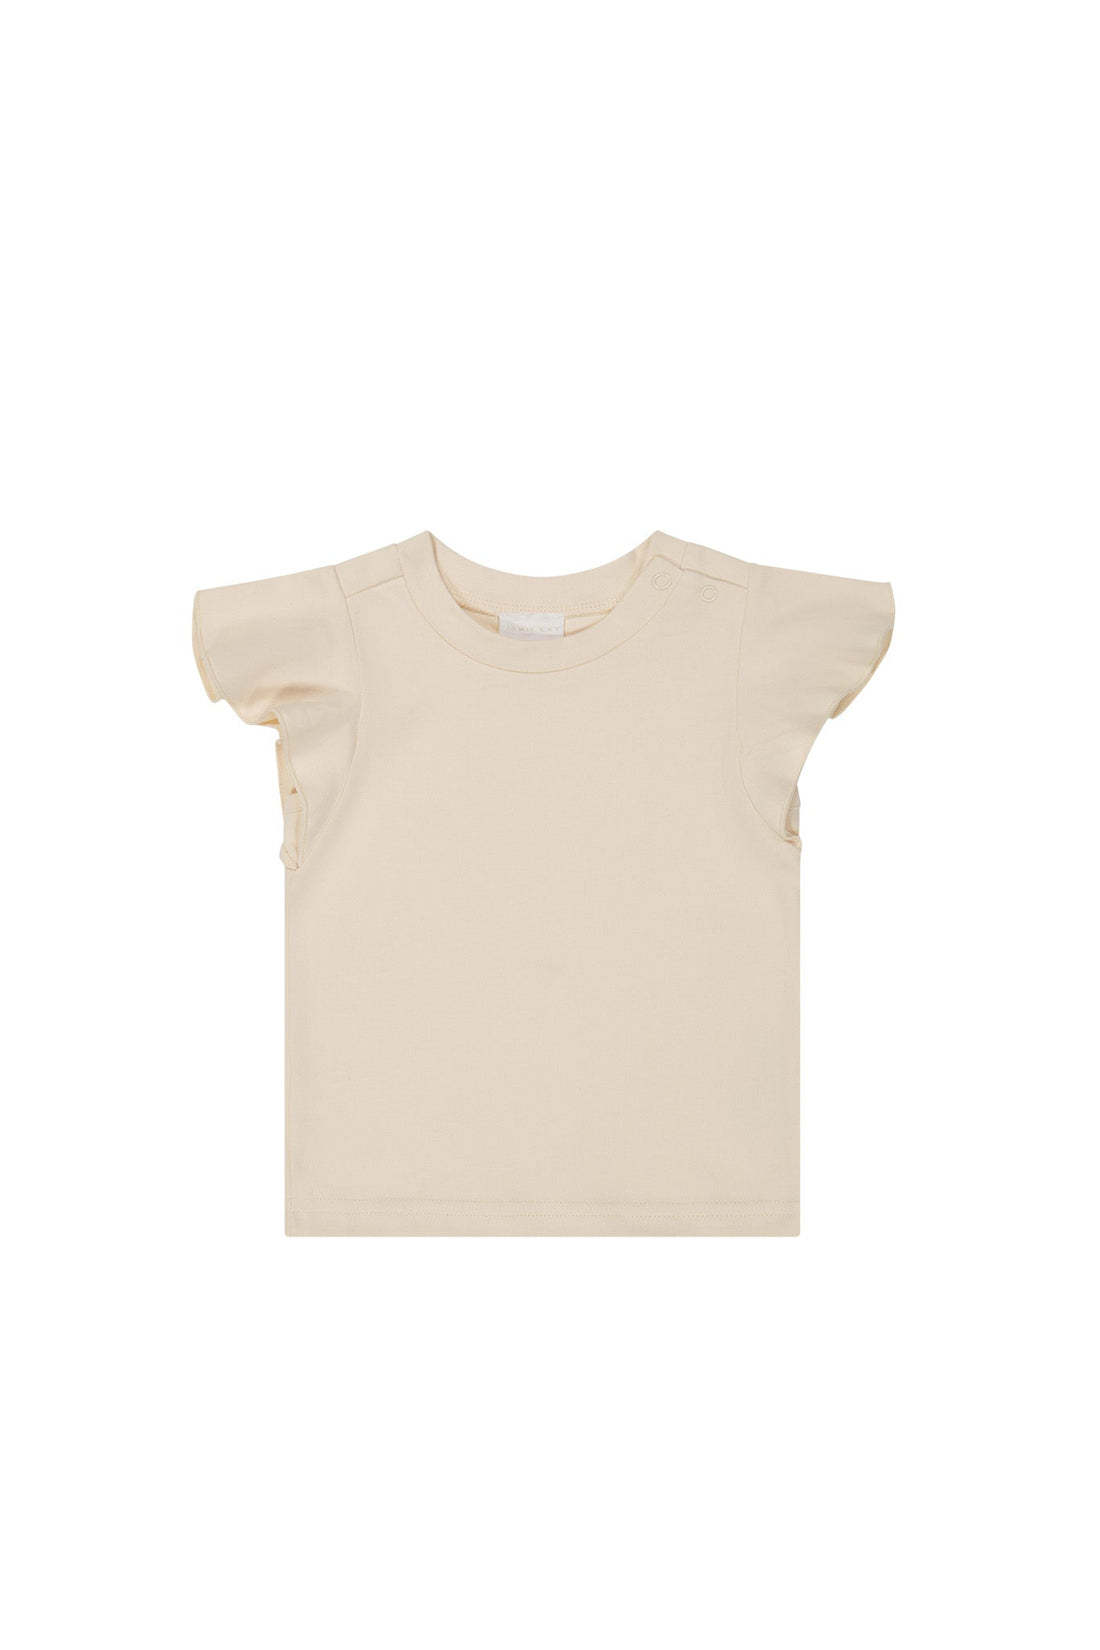 Pima Cotton Giselle Top - Ballet Pink Childrens Top from Jamie Kay USA